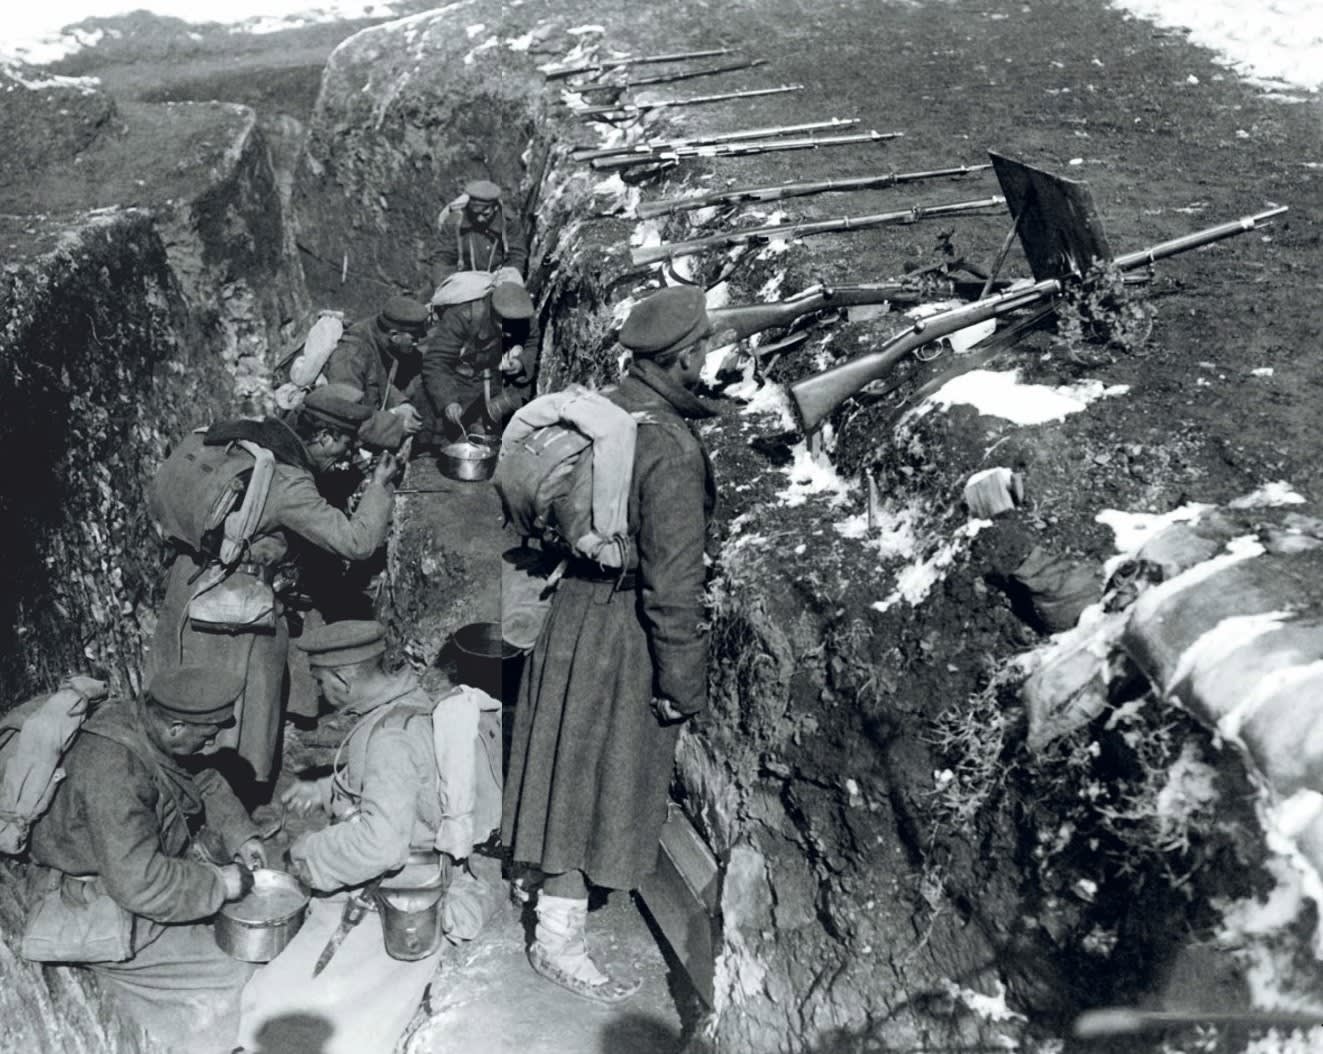 Bulgarian soldiers eating a meal in their trench in the Doiran area of the Salonikan front, also known as the Macedonian front, 1917. .